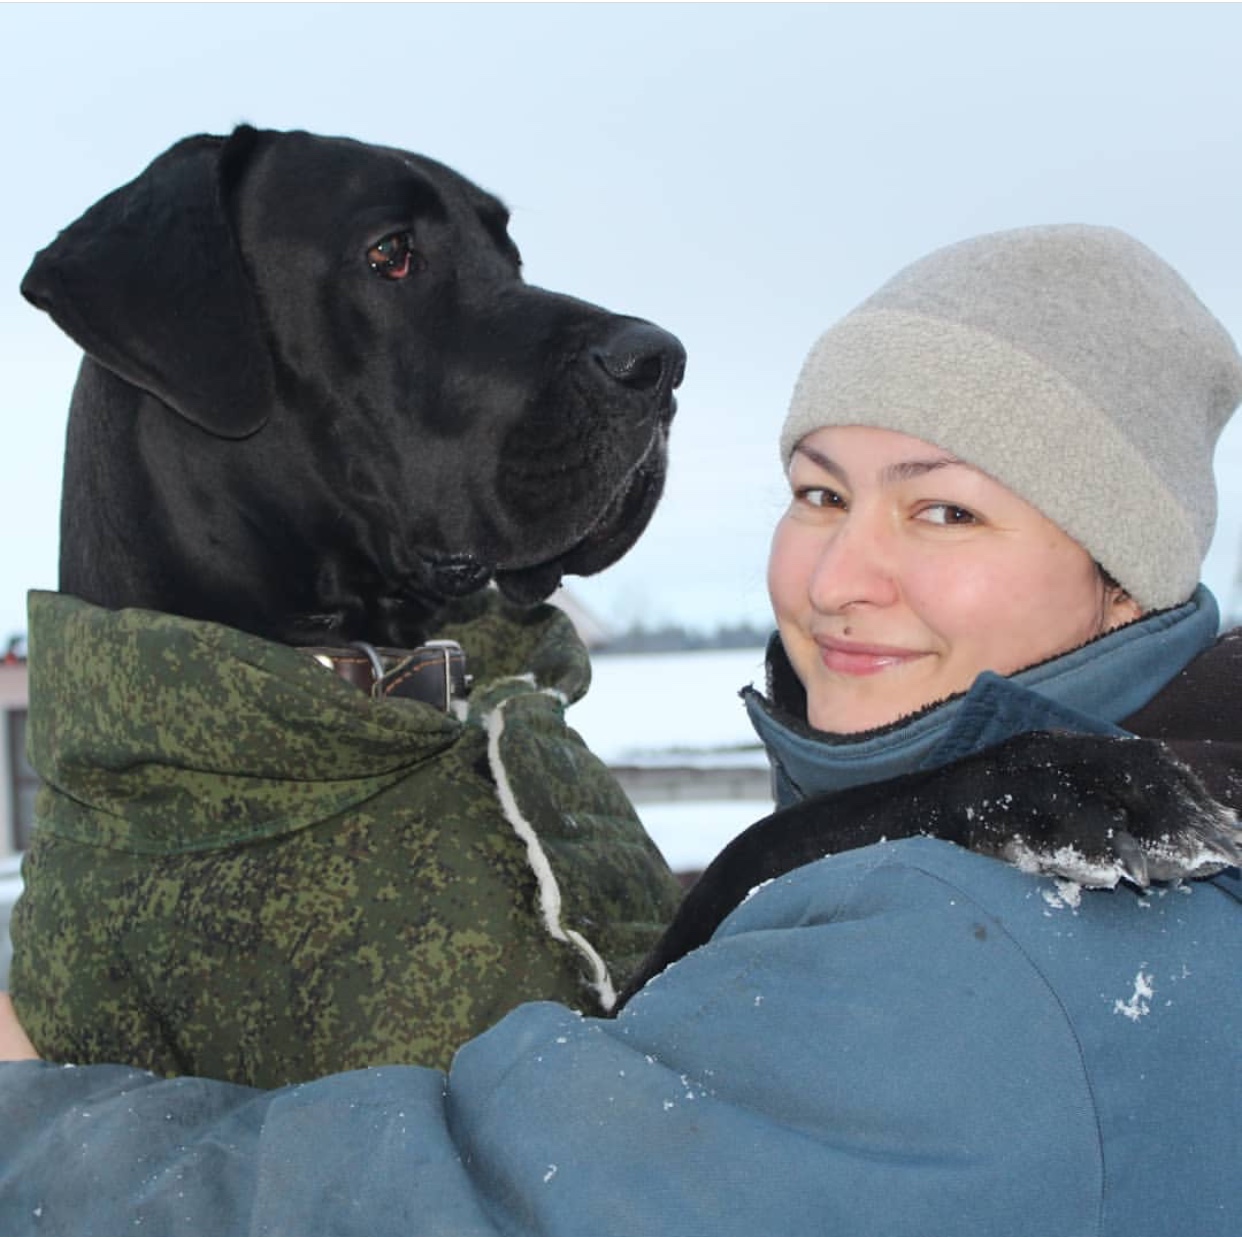 a woman embracing a Great Dane wearing a jacket while outdoors during winter